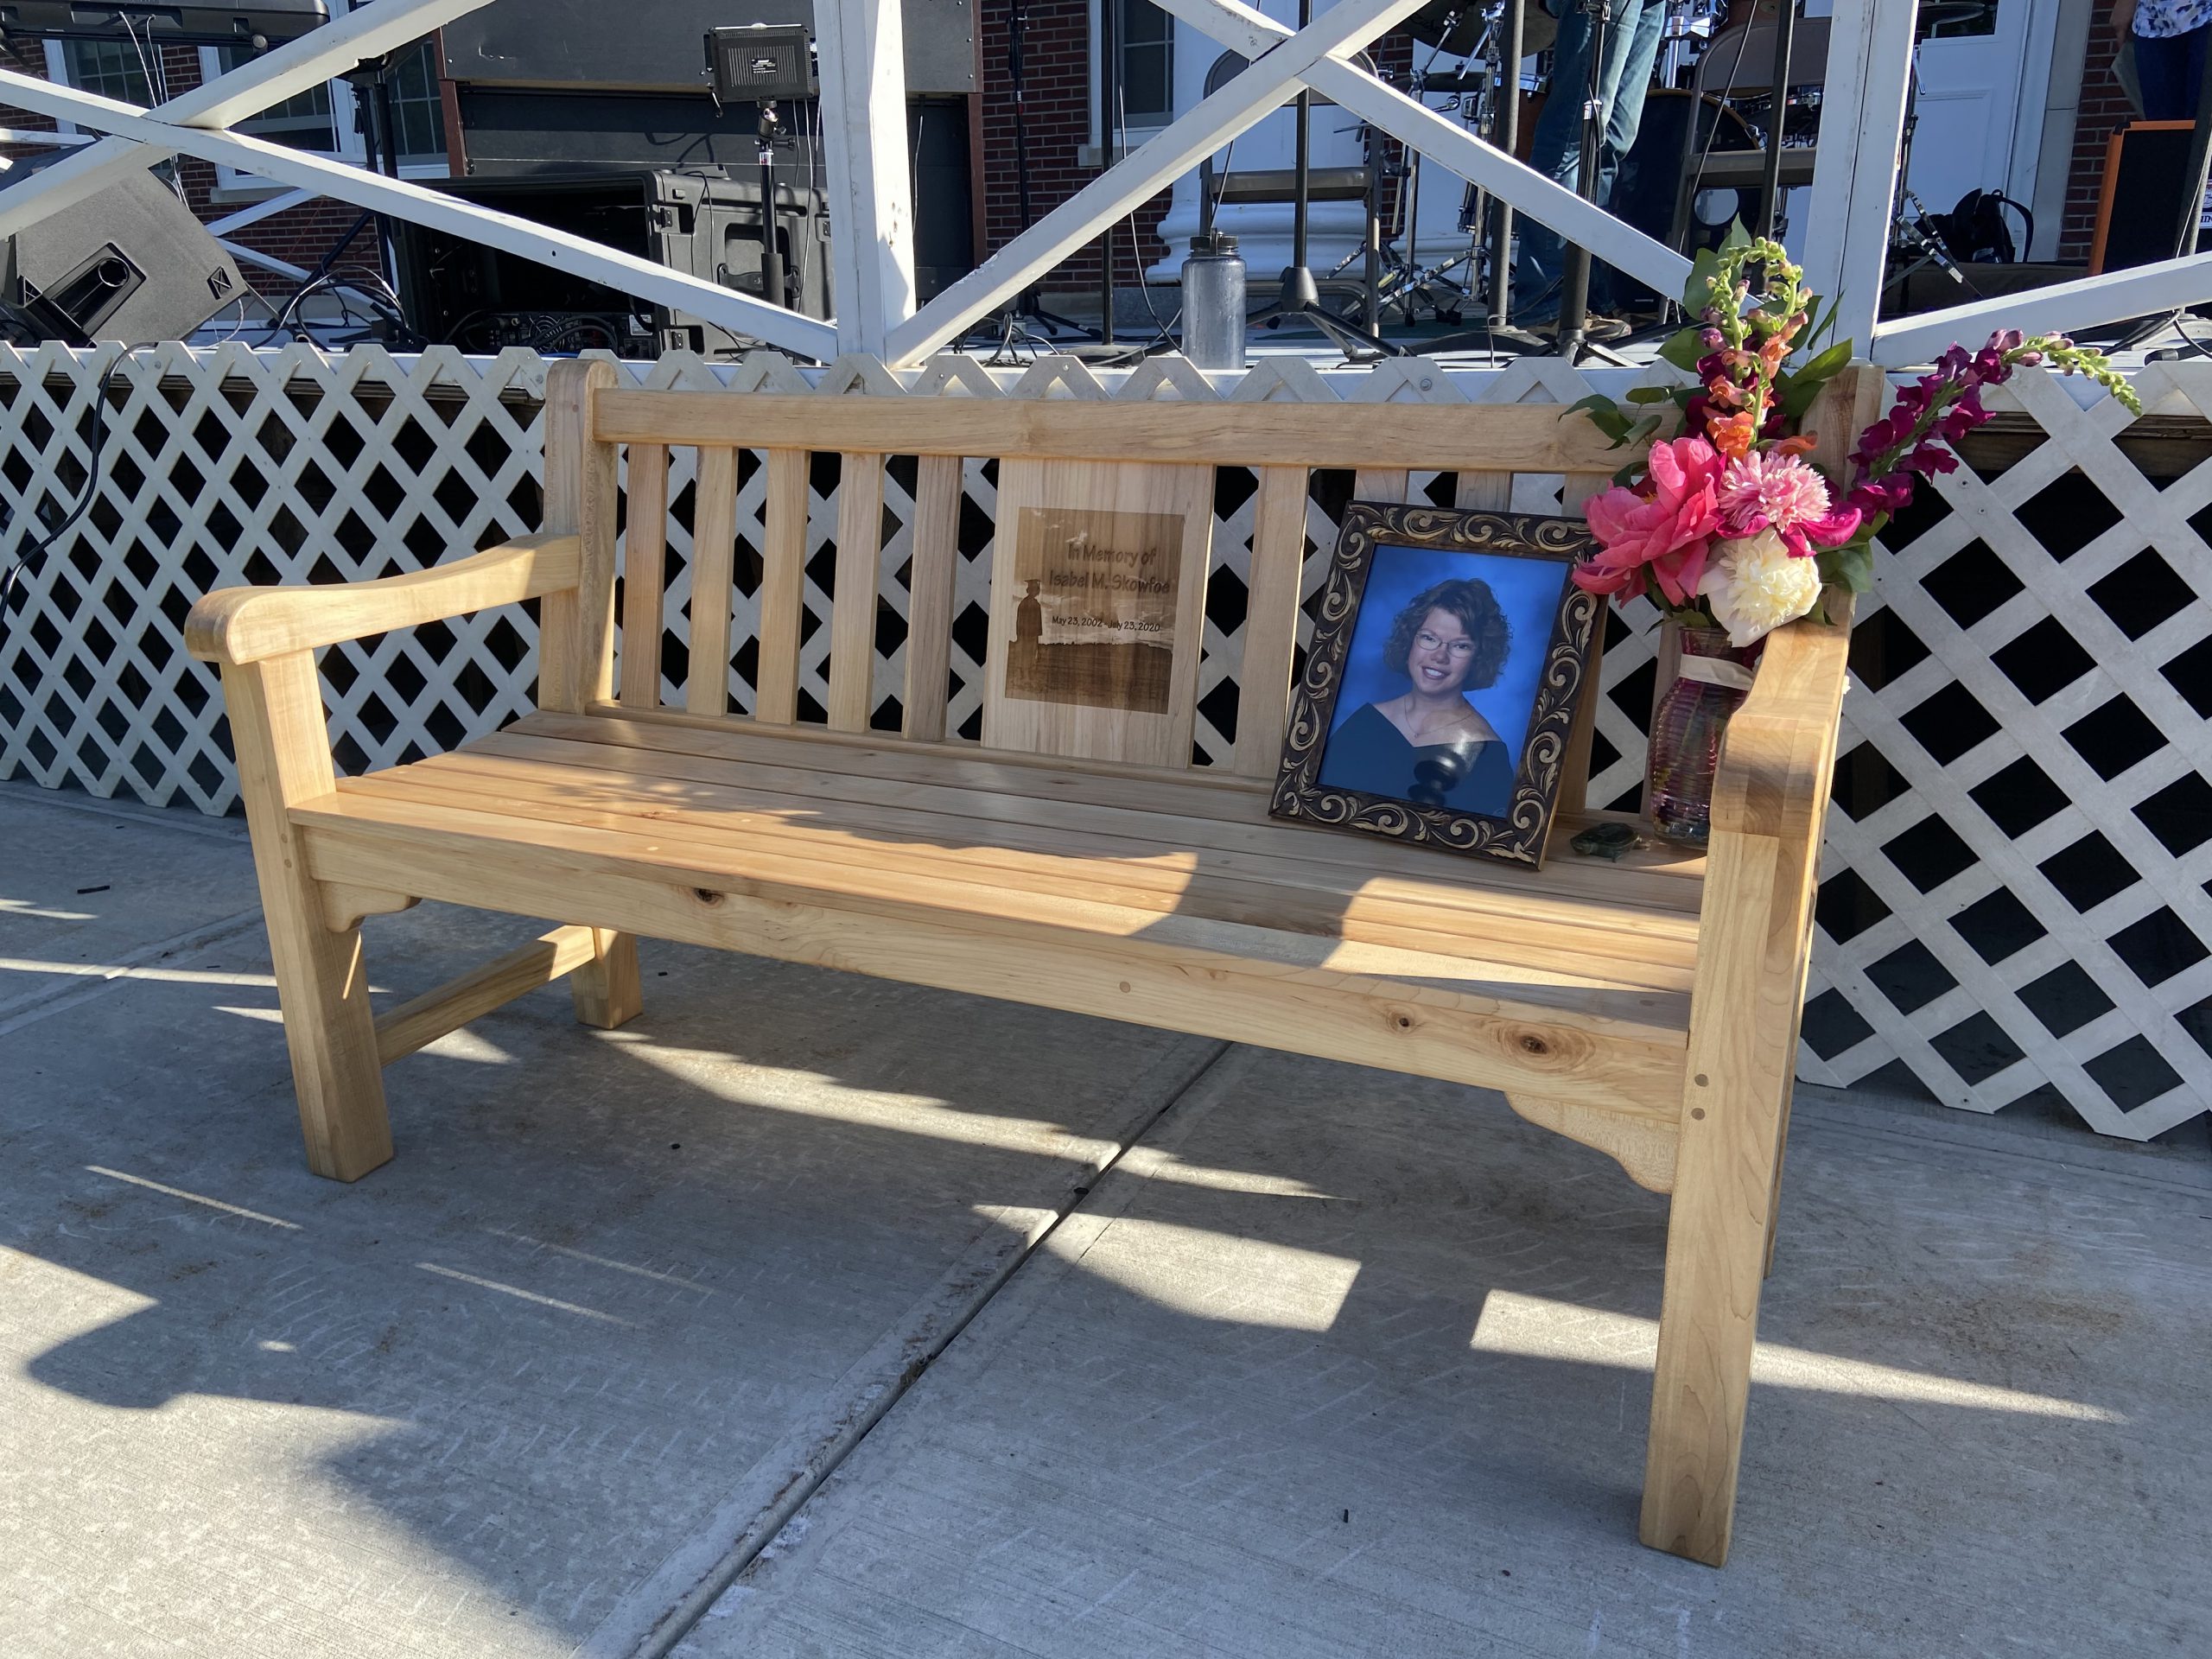 CTE students create a remembrance bench for Isabel Skowfoe